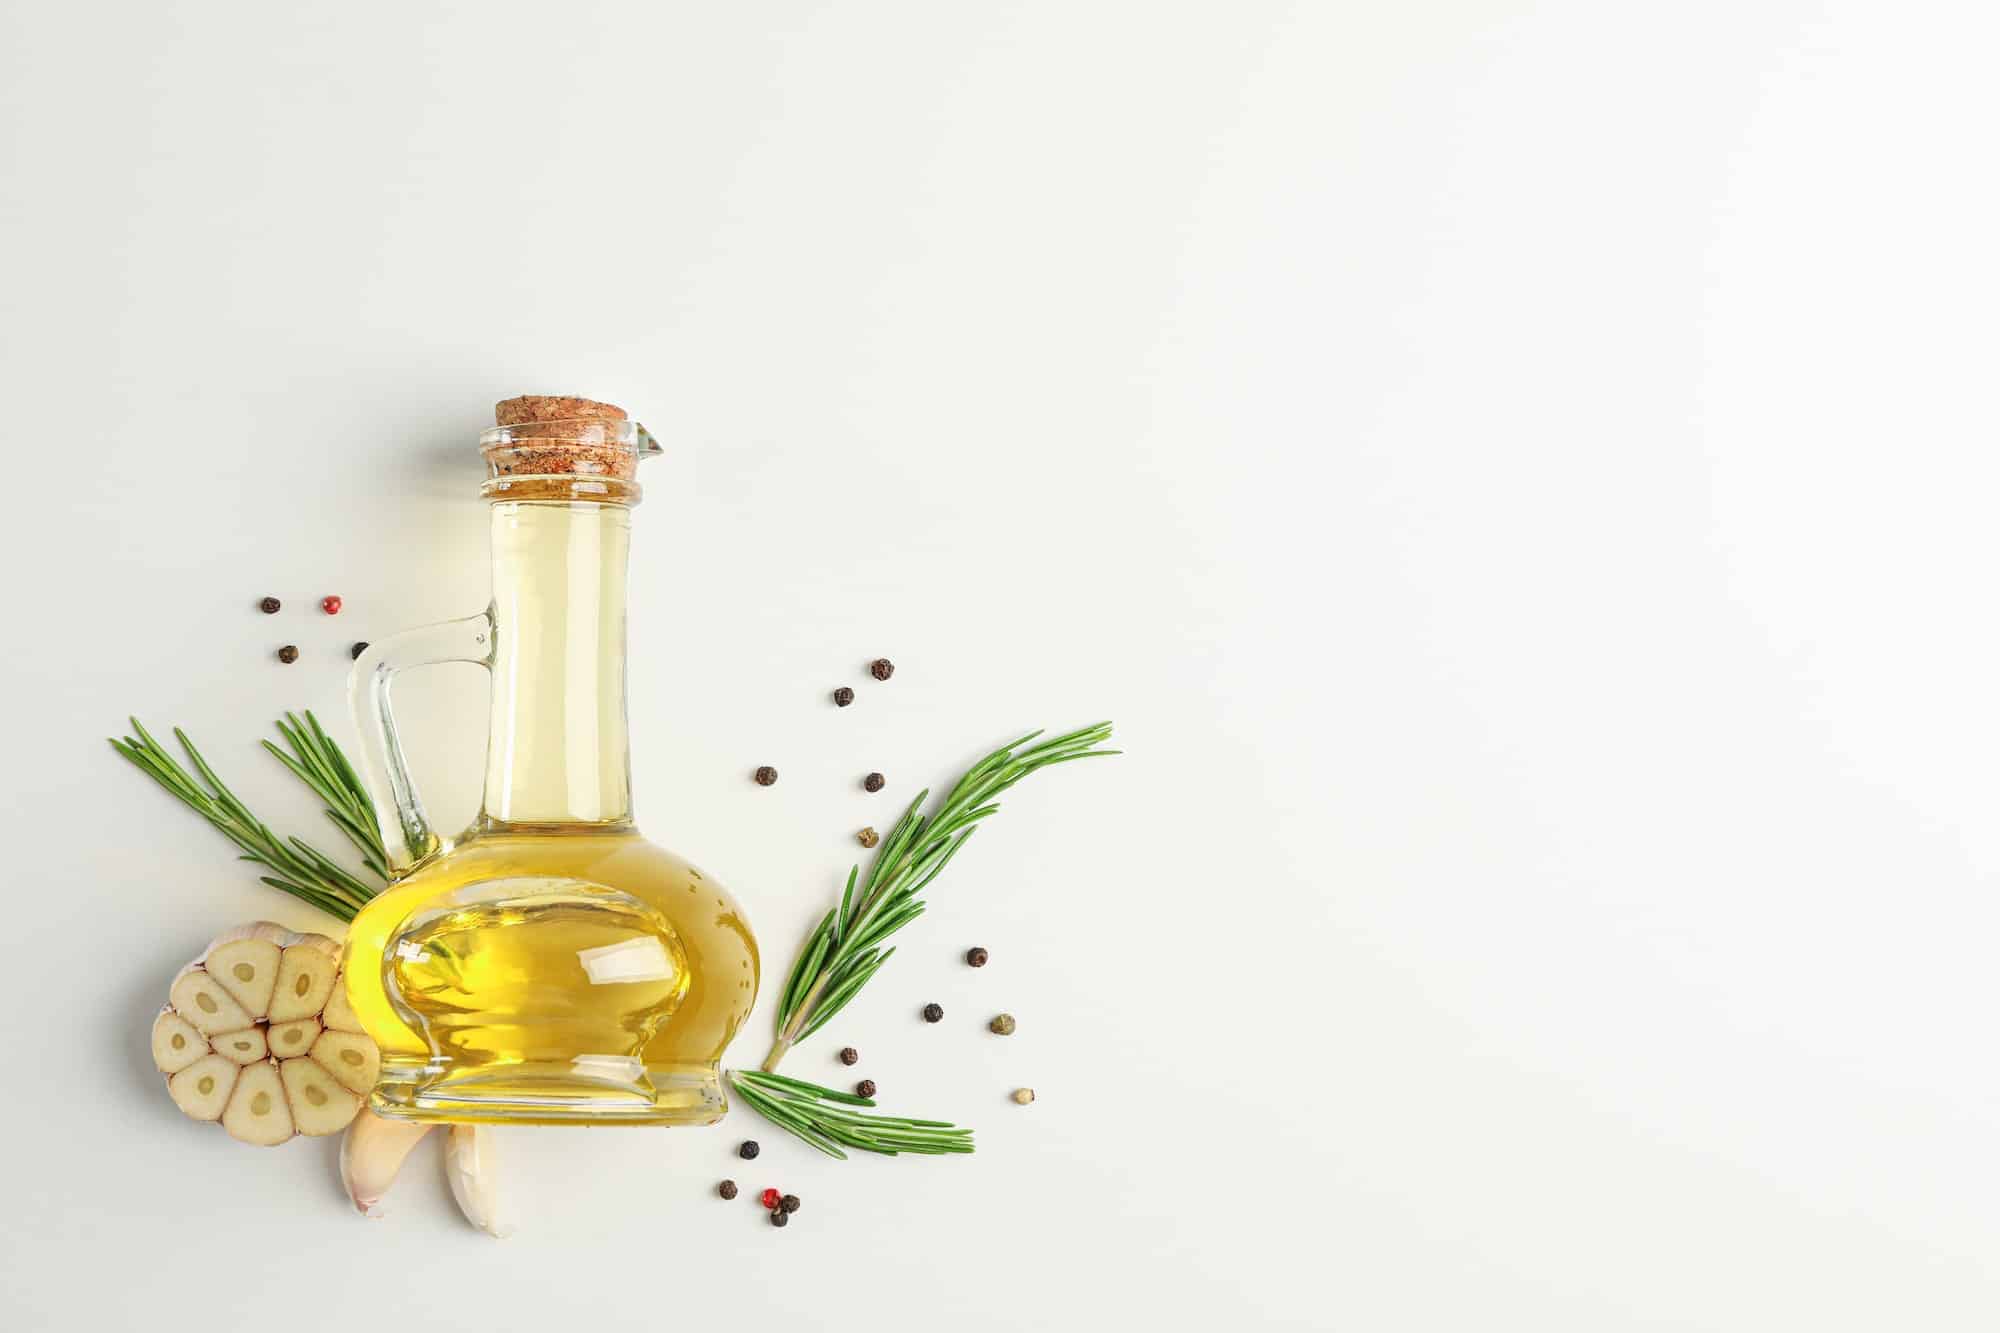 Rosemary oil and leaves, garlic, pepper on white background, top view